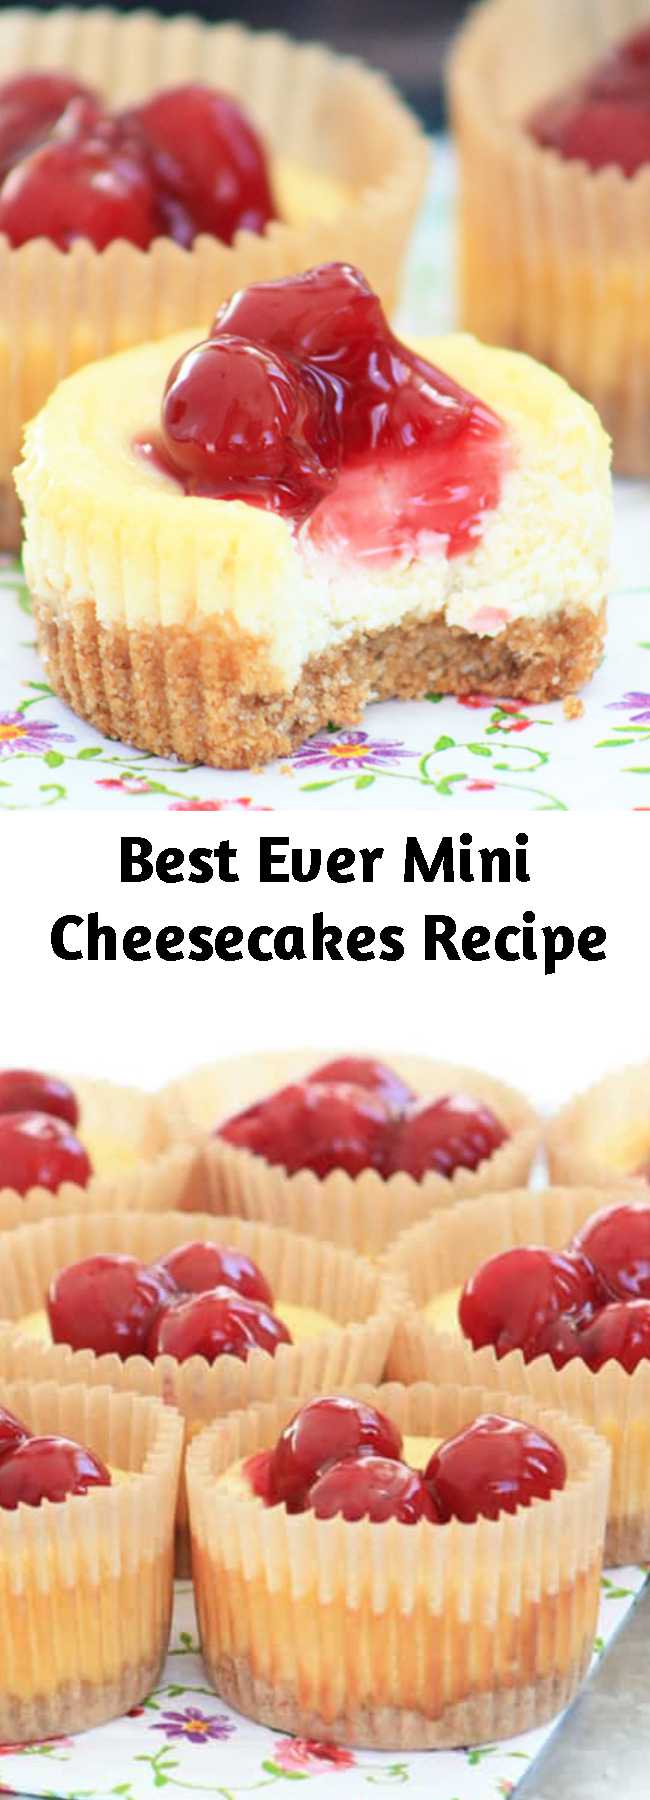 Best Ever Mini Cheesecakes Recipe - A mini cheesecake recipe using graham cracker crumbs, cream cheese, and cherry pie filling. My kids beg me to make these again and again!